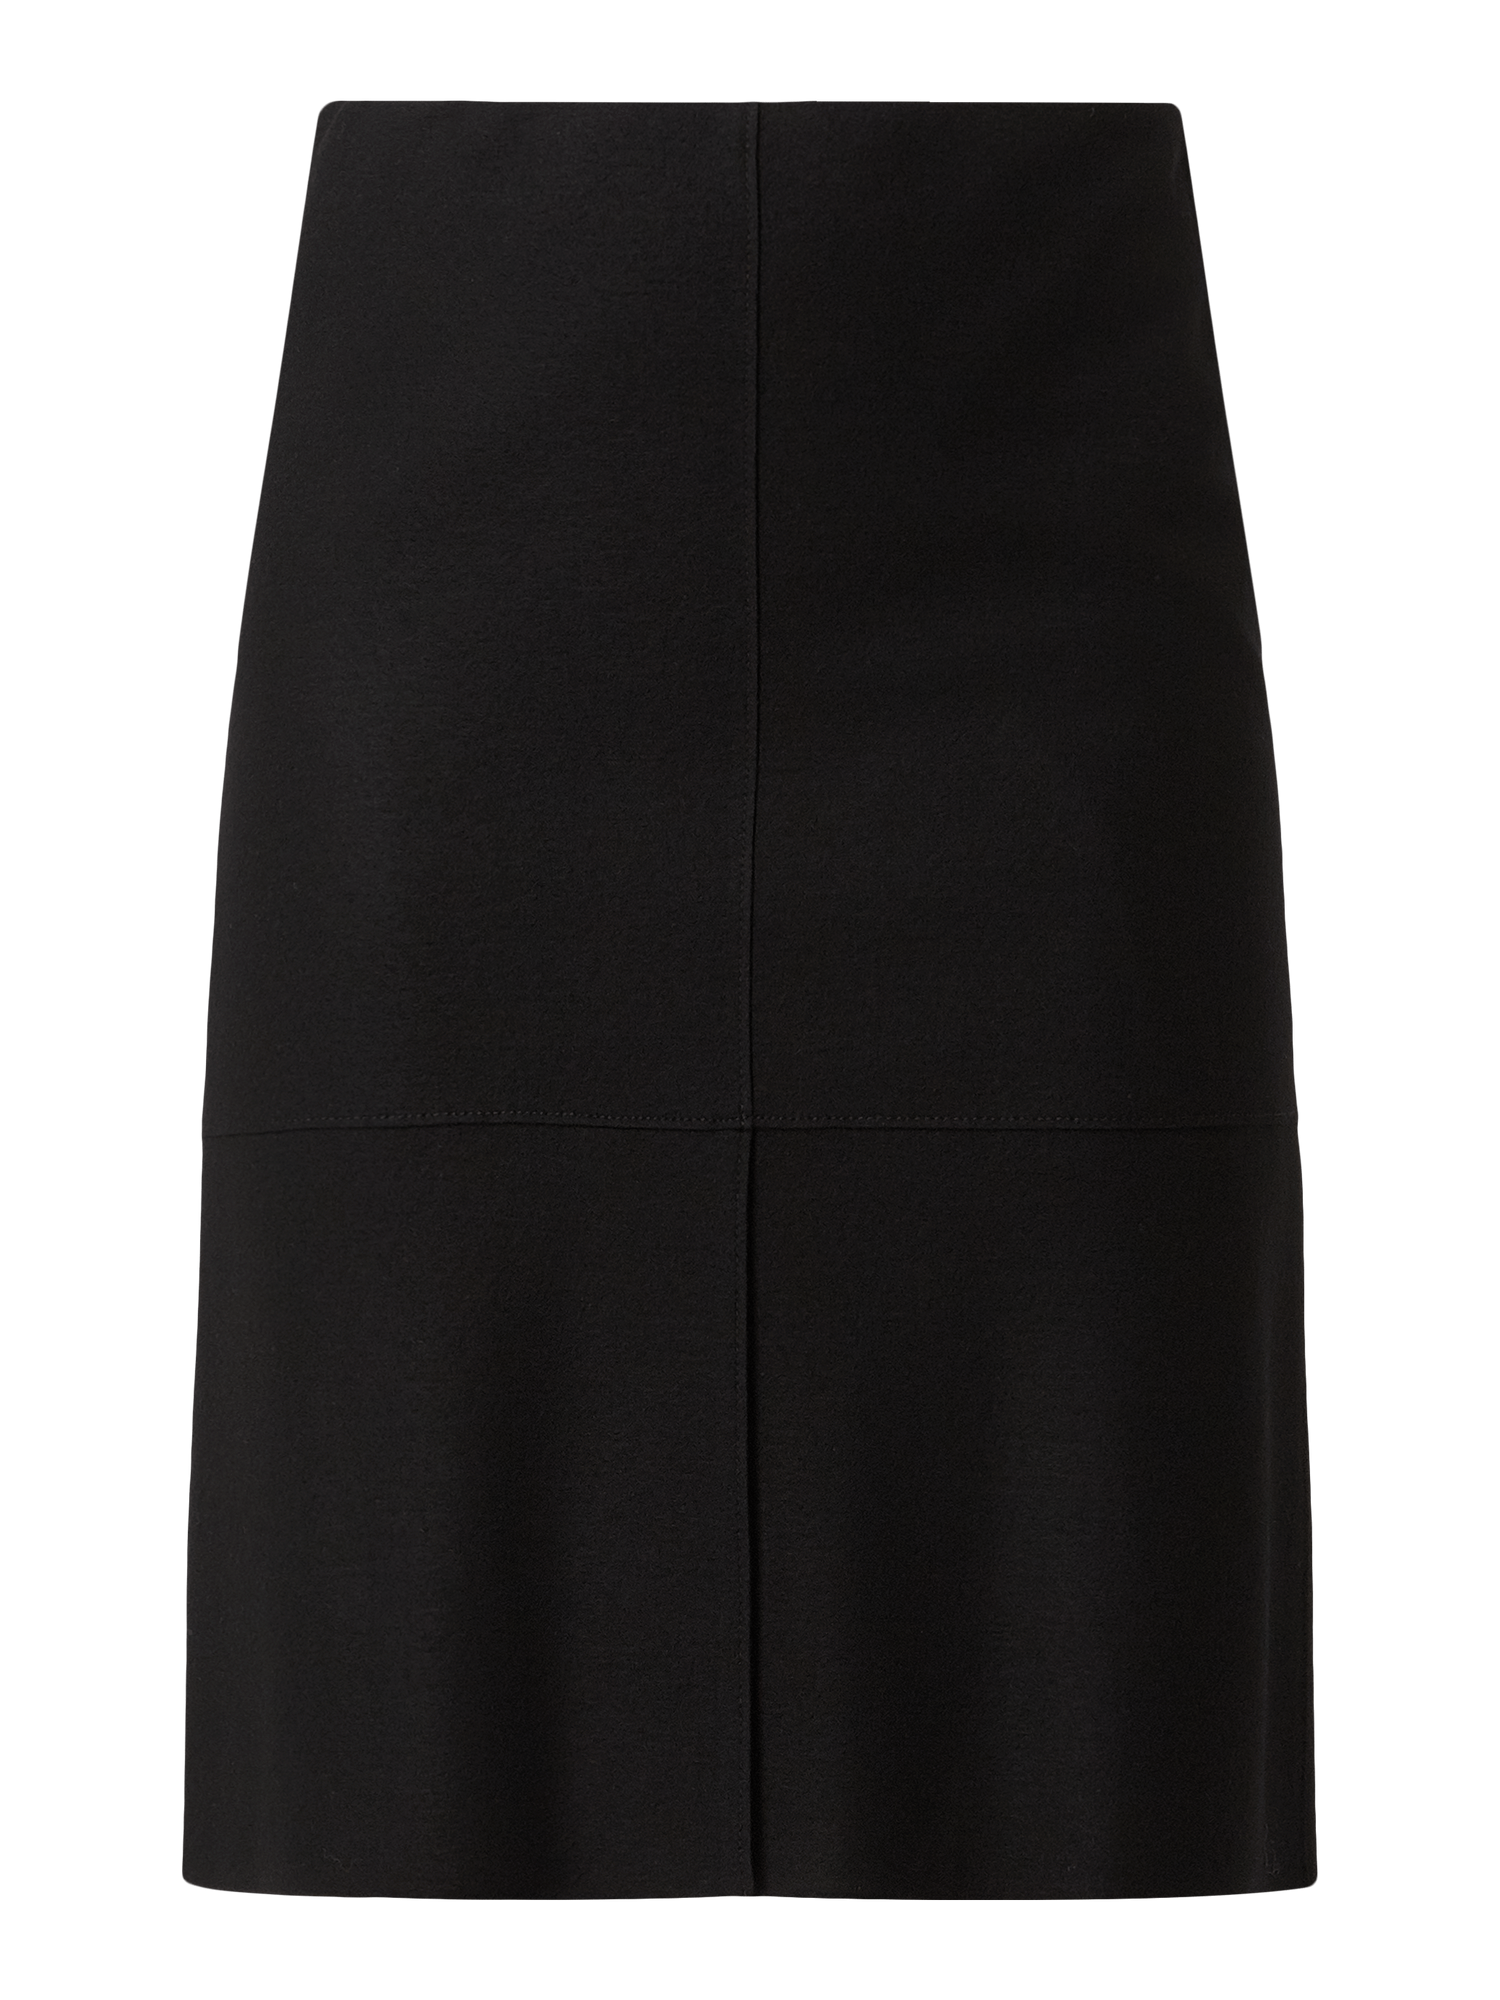 Marc Cain Collections Skirts Marc Cain Collections Wool Jersey Skirt Black MC 71.13 J42 izzi-of-baslow